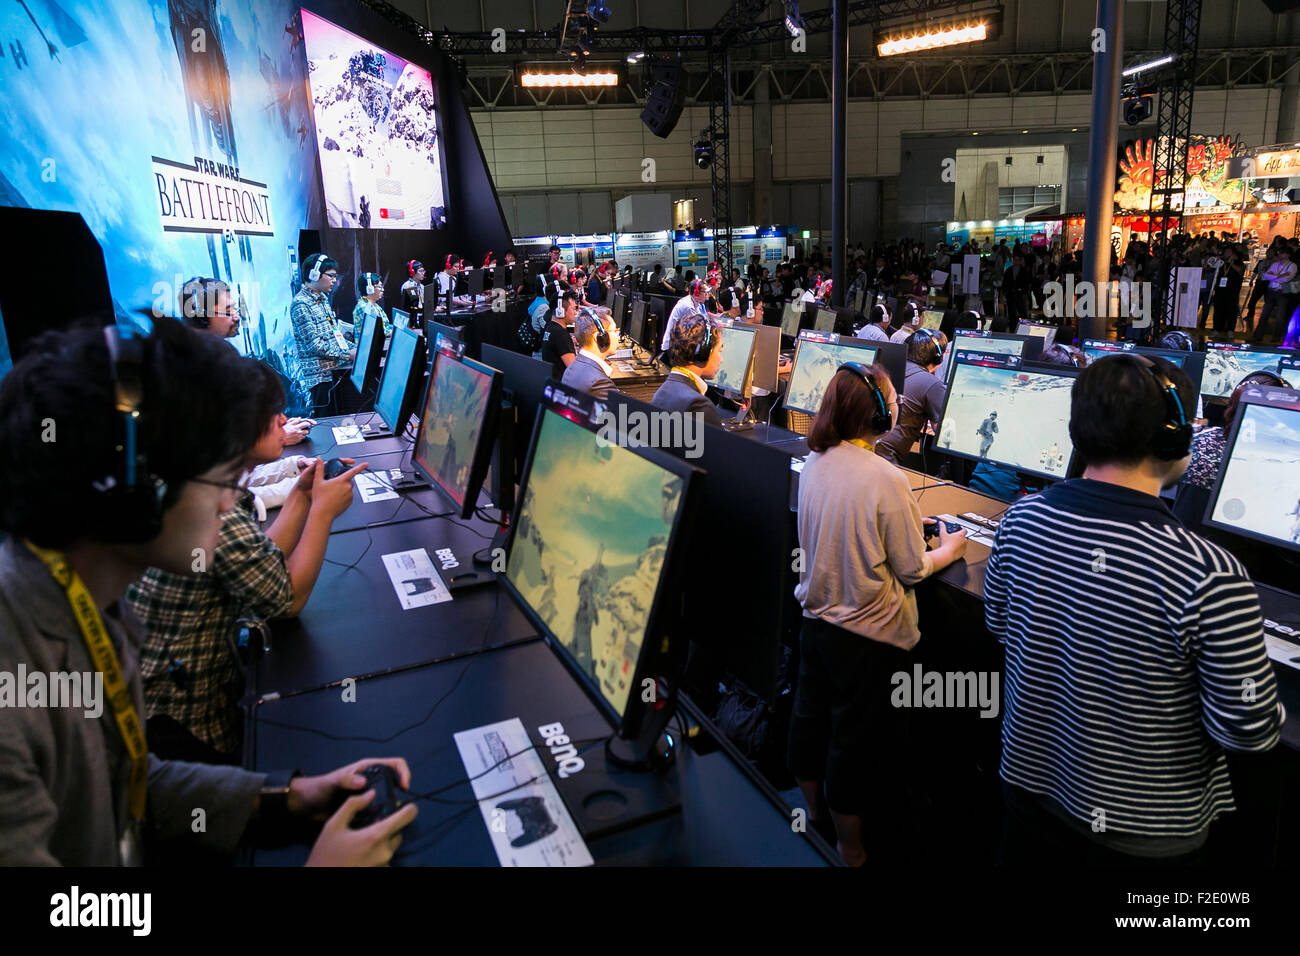 Tokyo, Japan. 17th September, 2015. Visitors play Star Wars: Battlefront video game at the Tokyo Game Show on September 17, 2015, Chiba, Japan. The world's biggest trade show for video game developers brings together 480 exhibitors from 37 different countries and runs from September 17th to 20th at the International Convention Complex Makuhari Messe in Chiba. This year the exhibition registered its' highest number of exhibitors ever, with 2,009 booths showing some 1,283 game titles for smartphones, games consoles, PC and TV platforms. Credit:  Aflo Co. Ltd./Alamy Live News Stock Photo